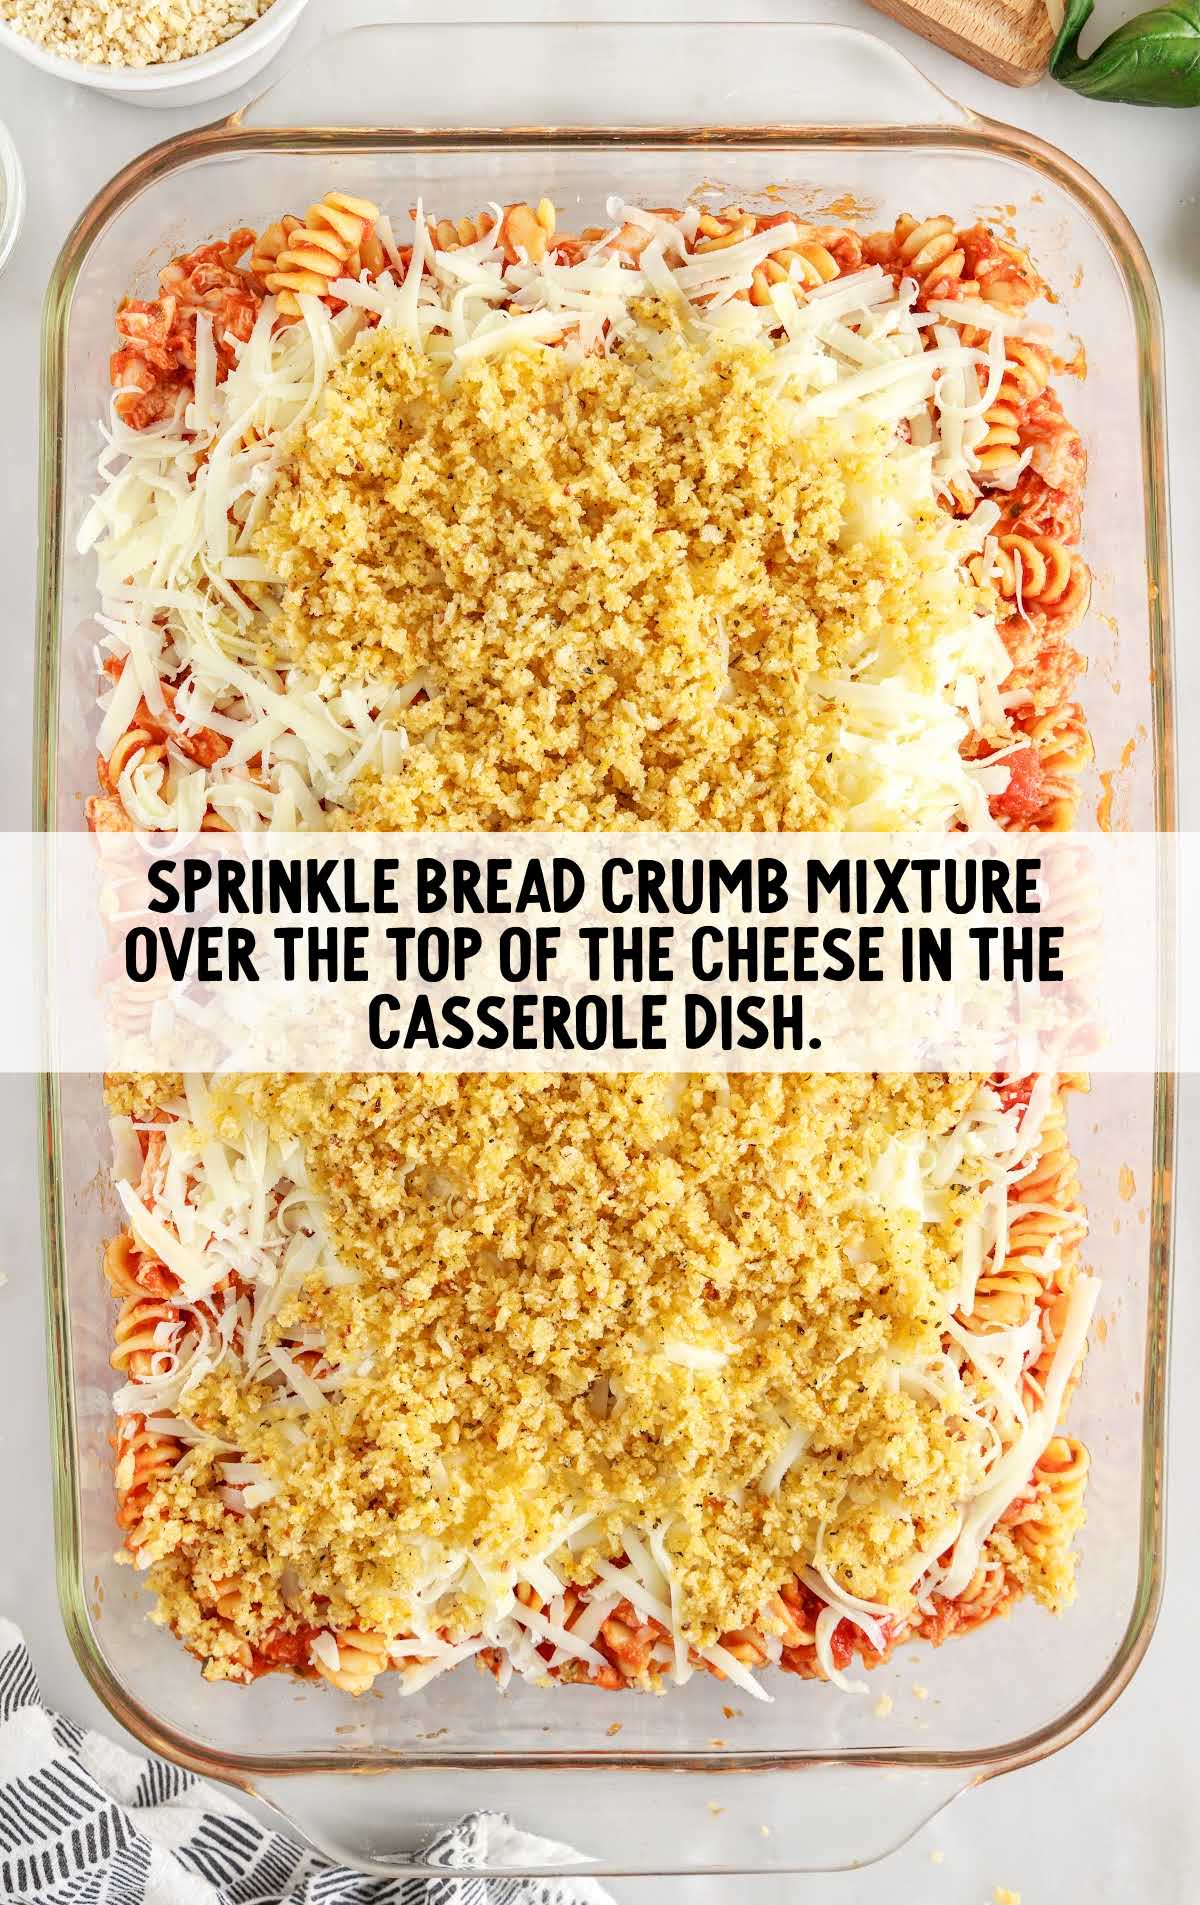 bred crumbs mixture sprinkled over the top of the cheese 